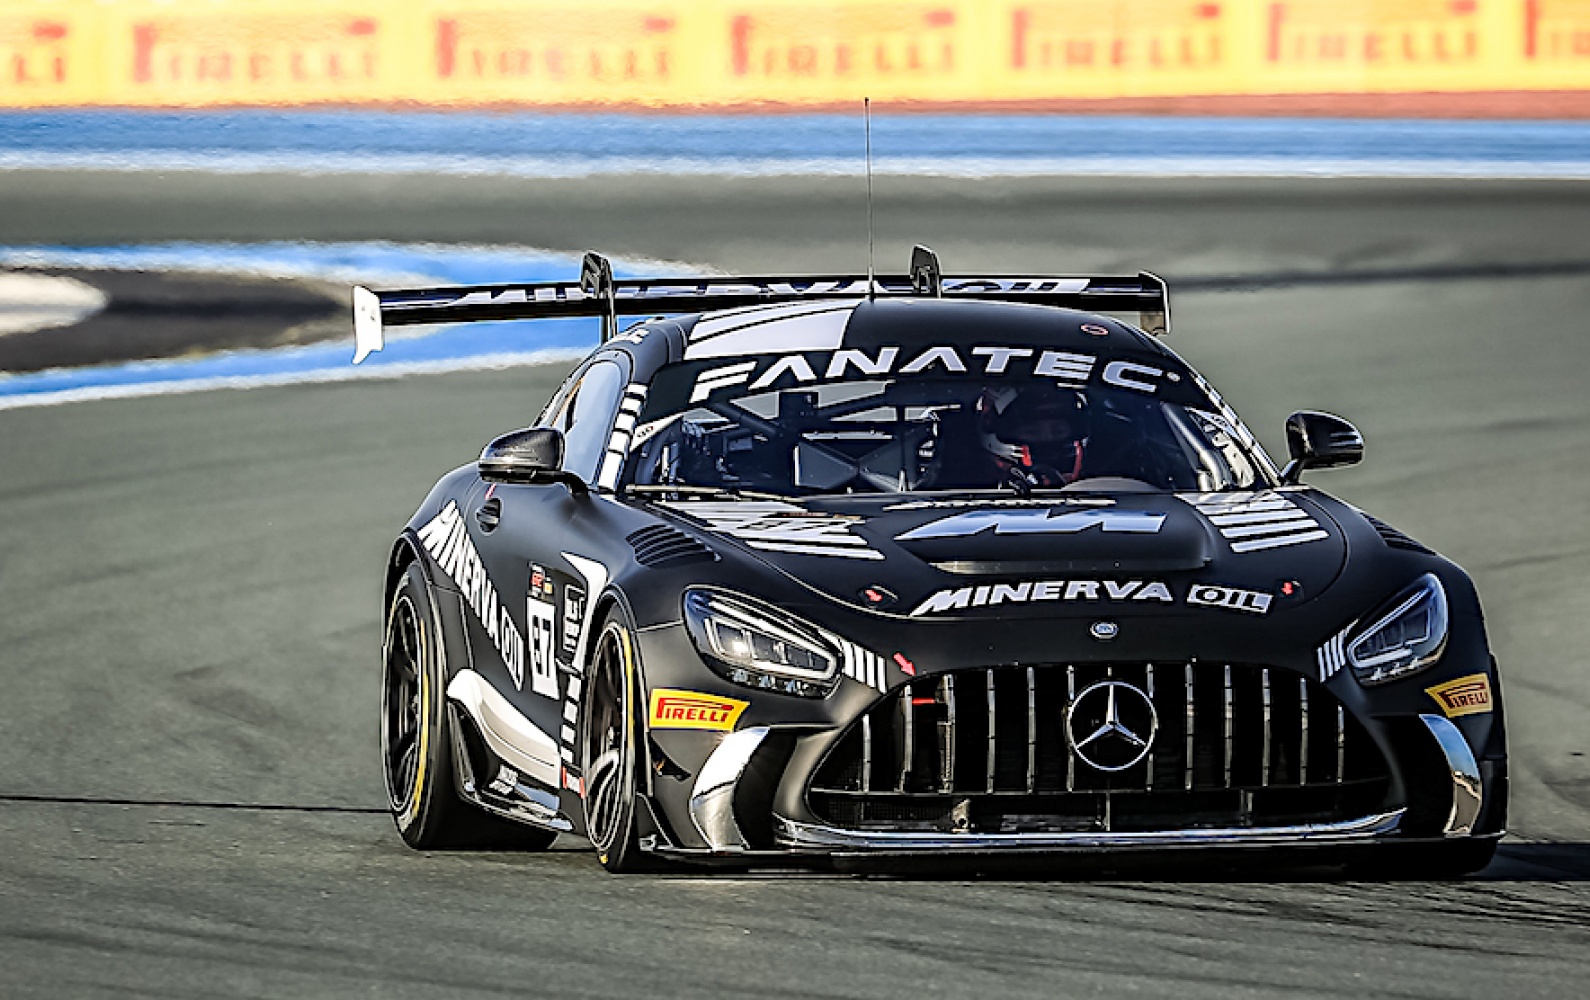 Fanatec GT2 European Series - Paul Ricard (France) - Pole, victory and podium!